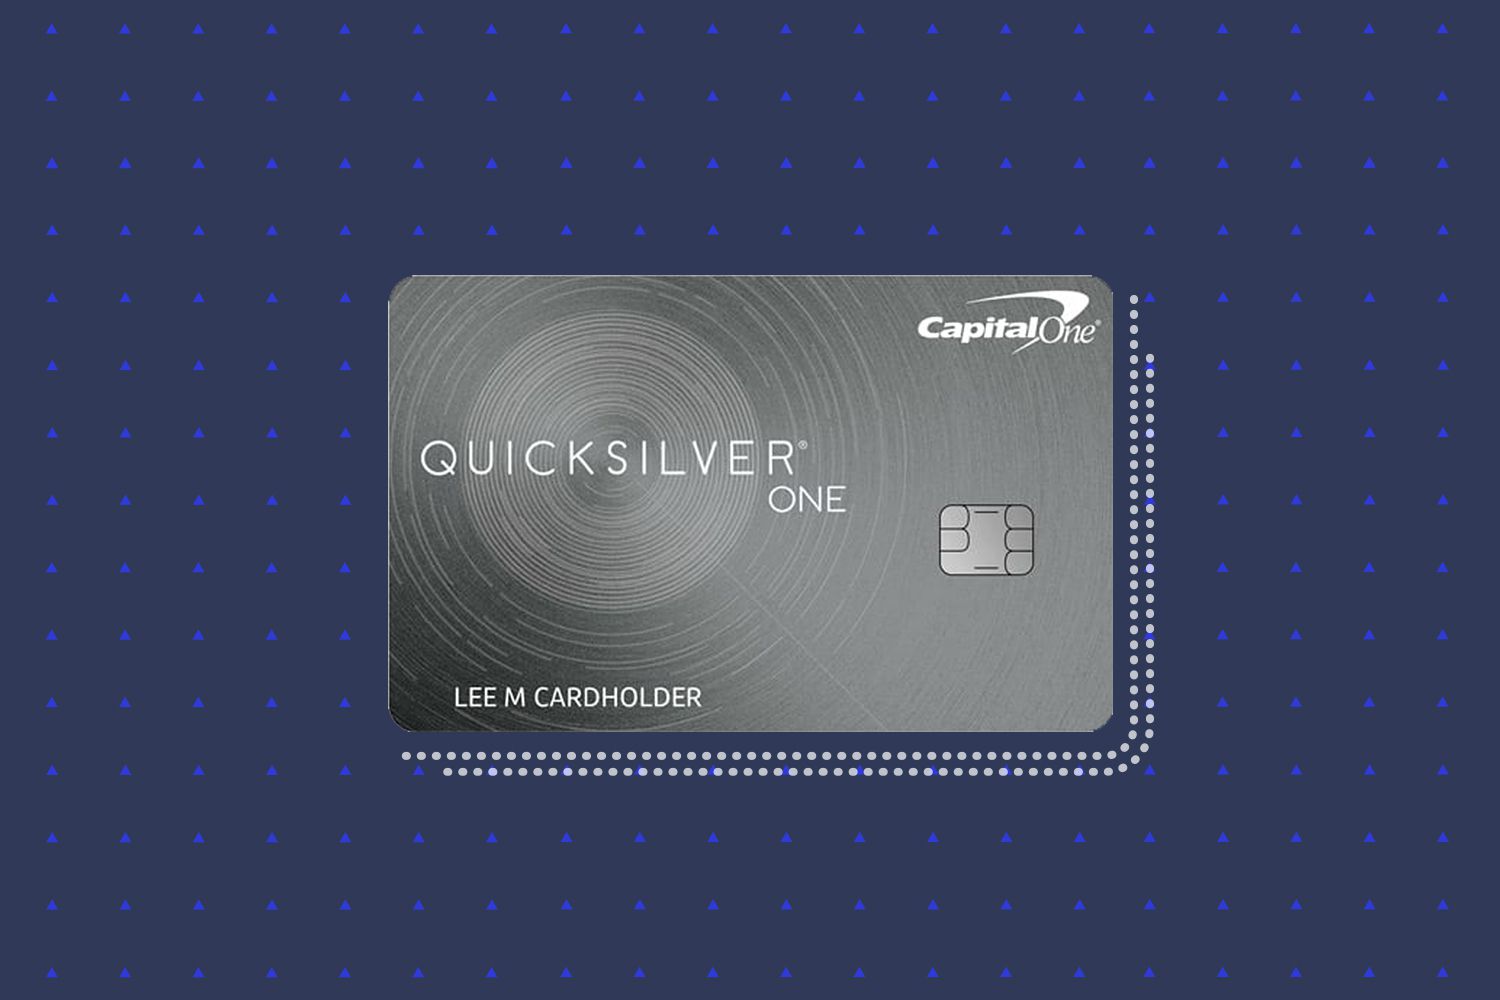 What Credit Score Do You Need For Capital One Quicksilver